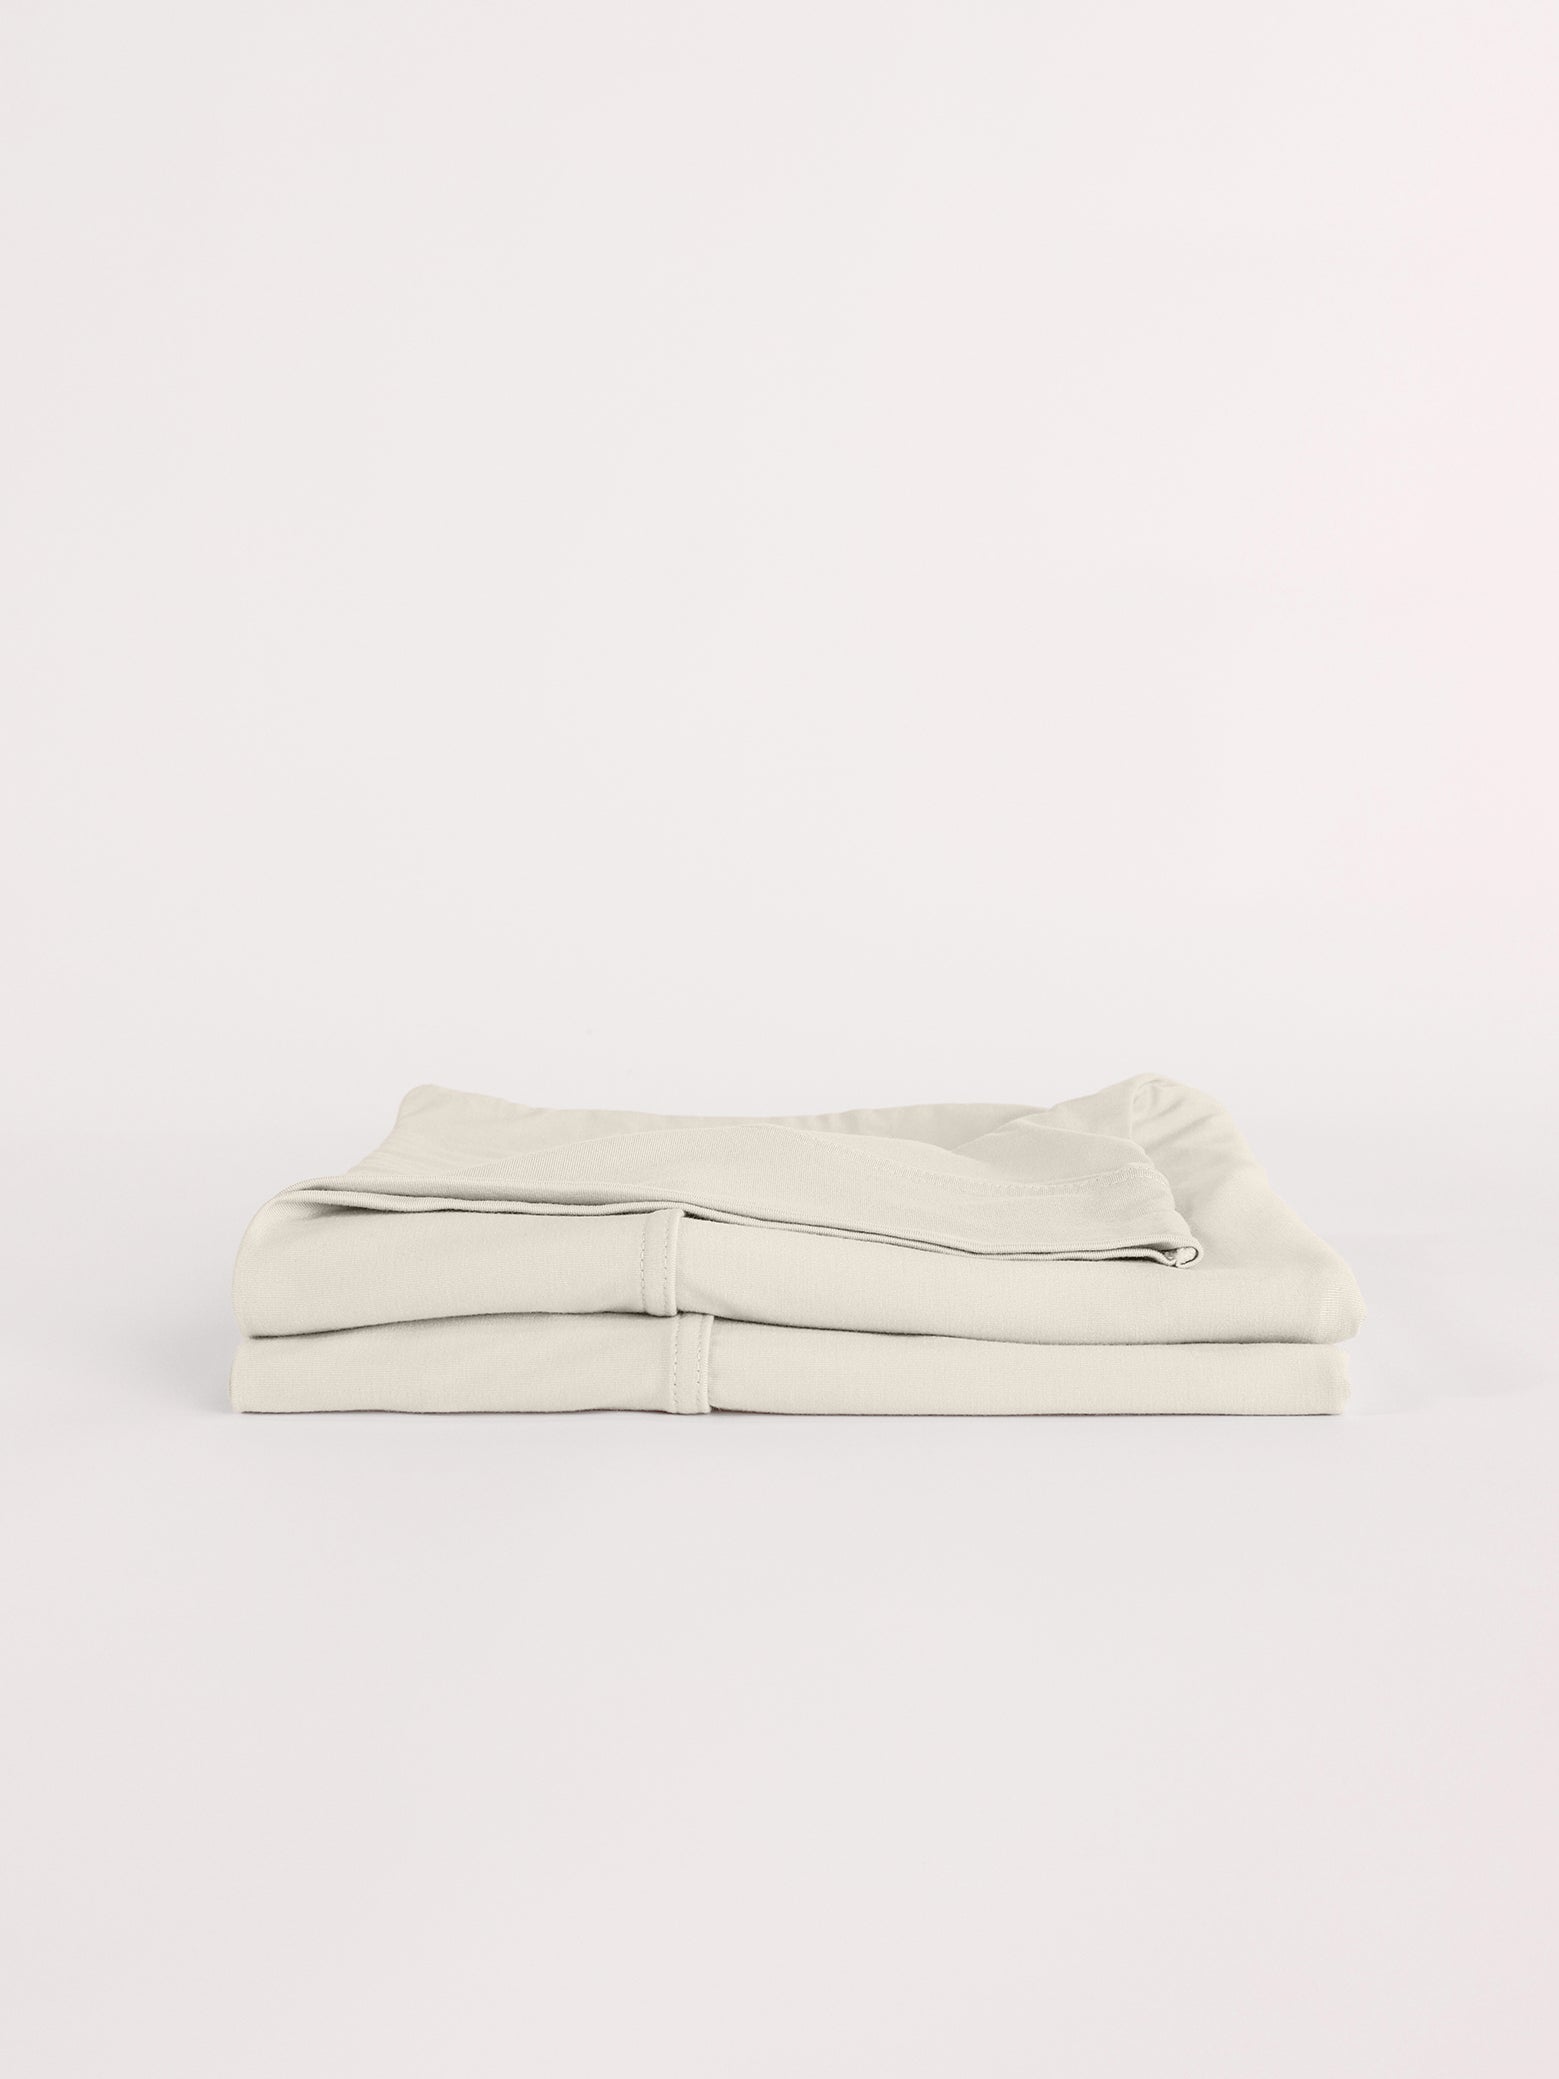 Birch pillowcases folded with white background |Color:Birch